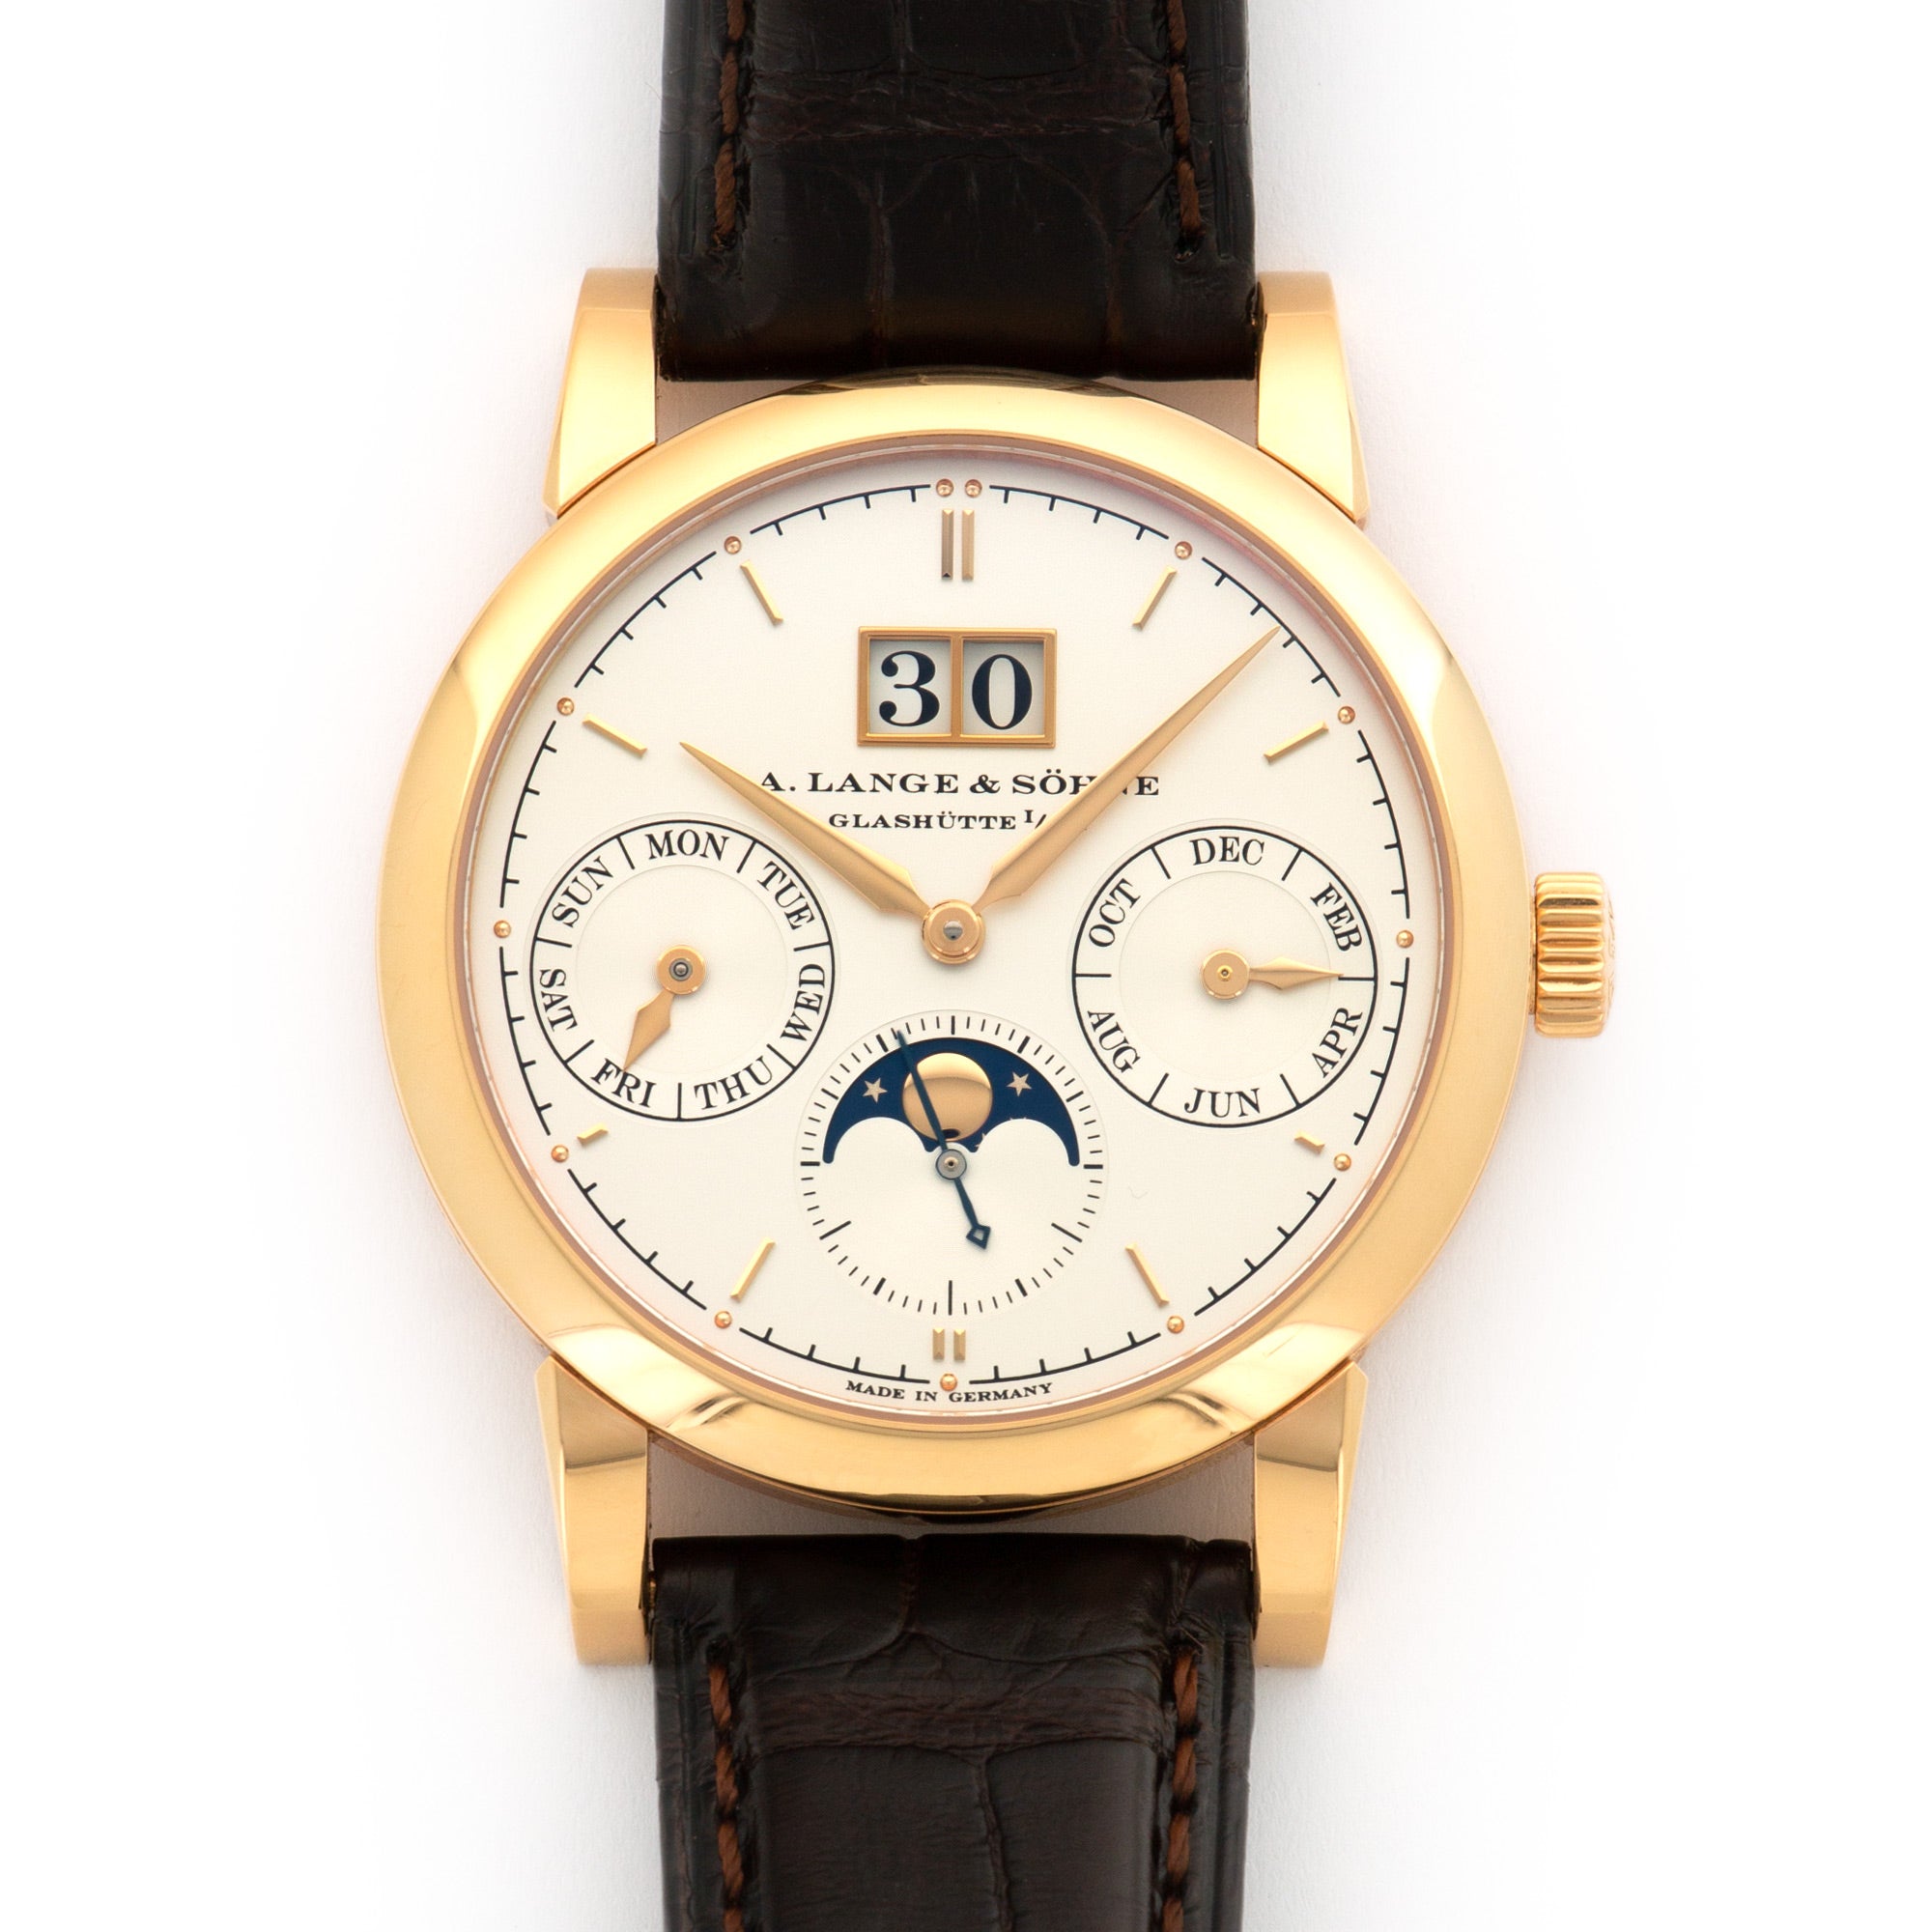 A. Lange & Sohne - A. Lange & Sohne Rose Gold Saxonia Annual Calendar Watch Ref. 330.032 - The Keystone Watches